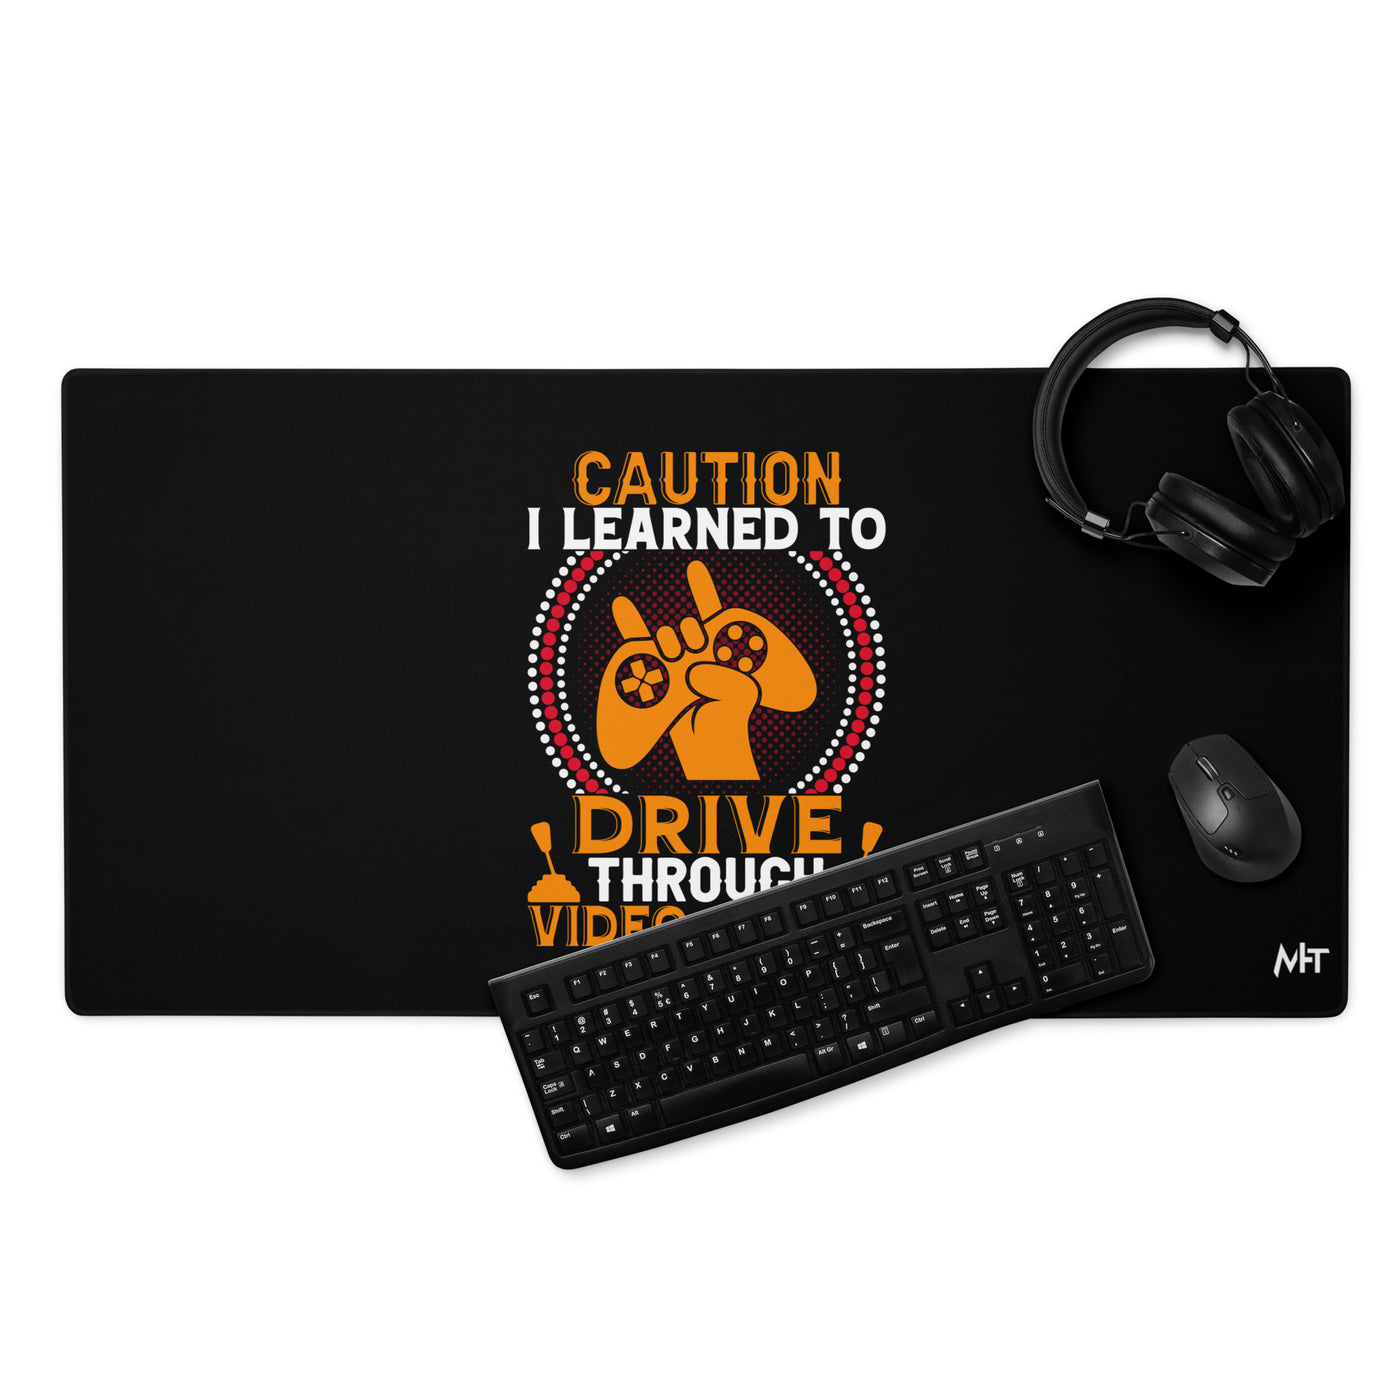 Caution! I learned to Drive Video Games Desk Mat